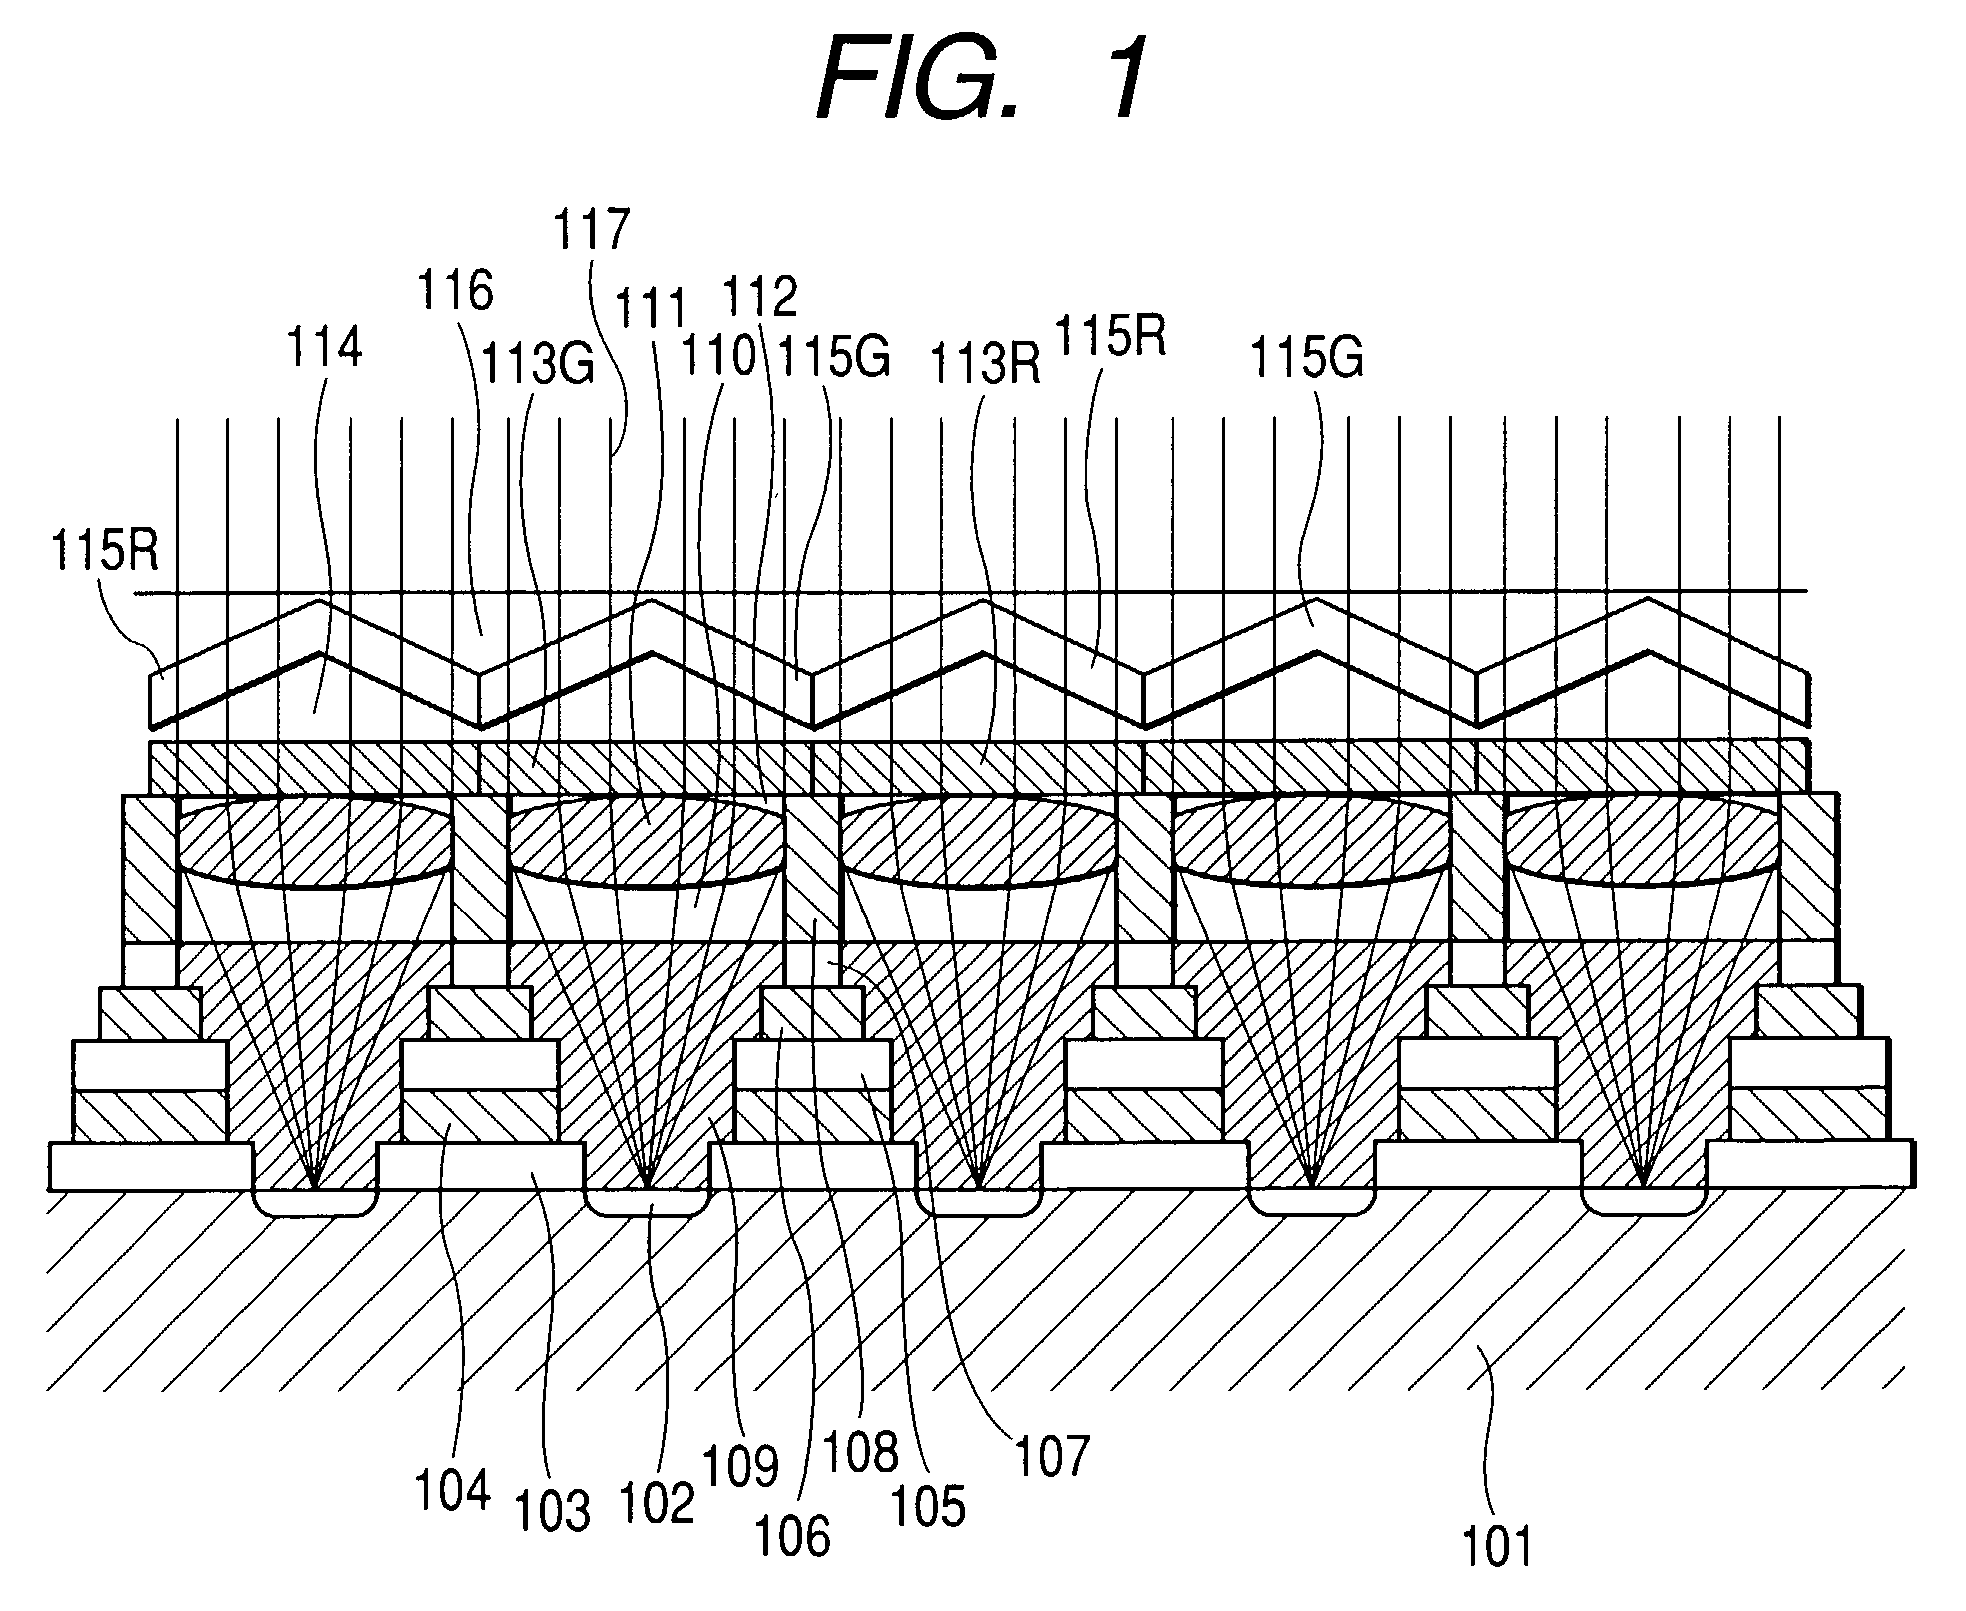 Image pickup apparatus containing light adjustment portion with reflection of a portion of light onto adjacent pixels